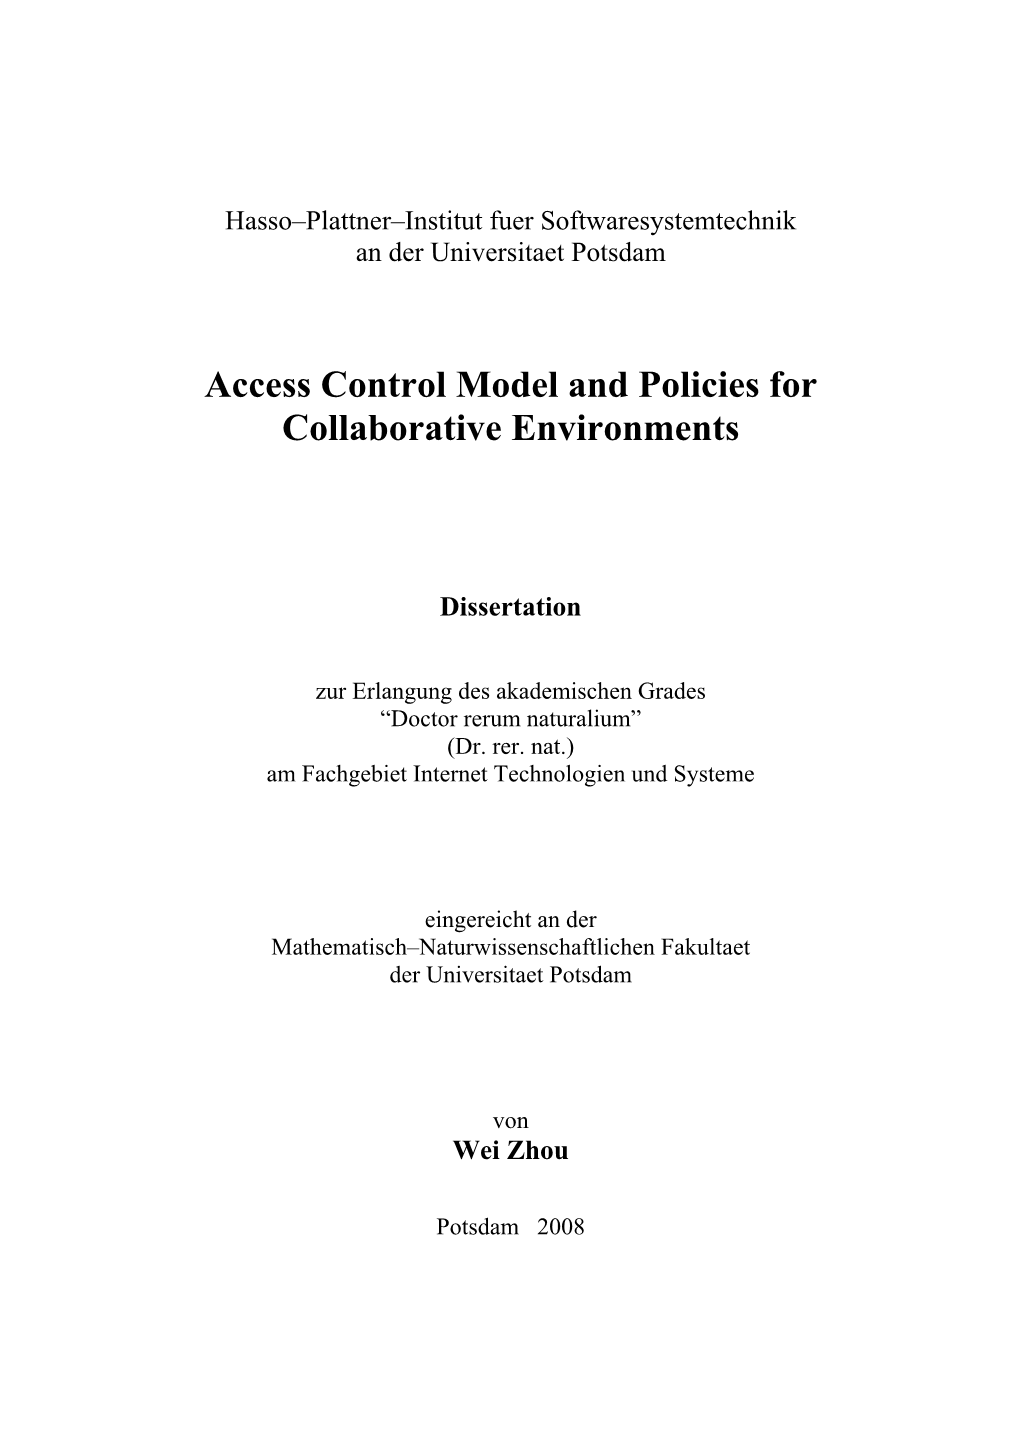 Access Control Model and Policies for Collaborative Environments